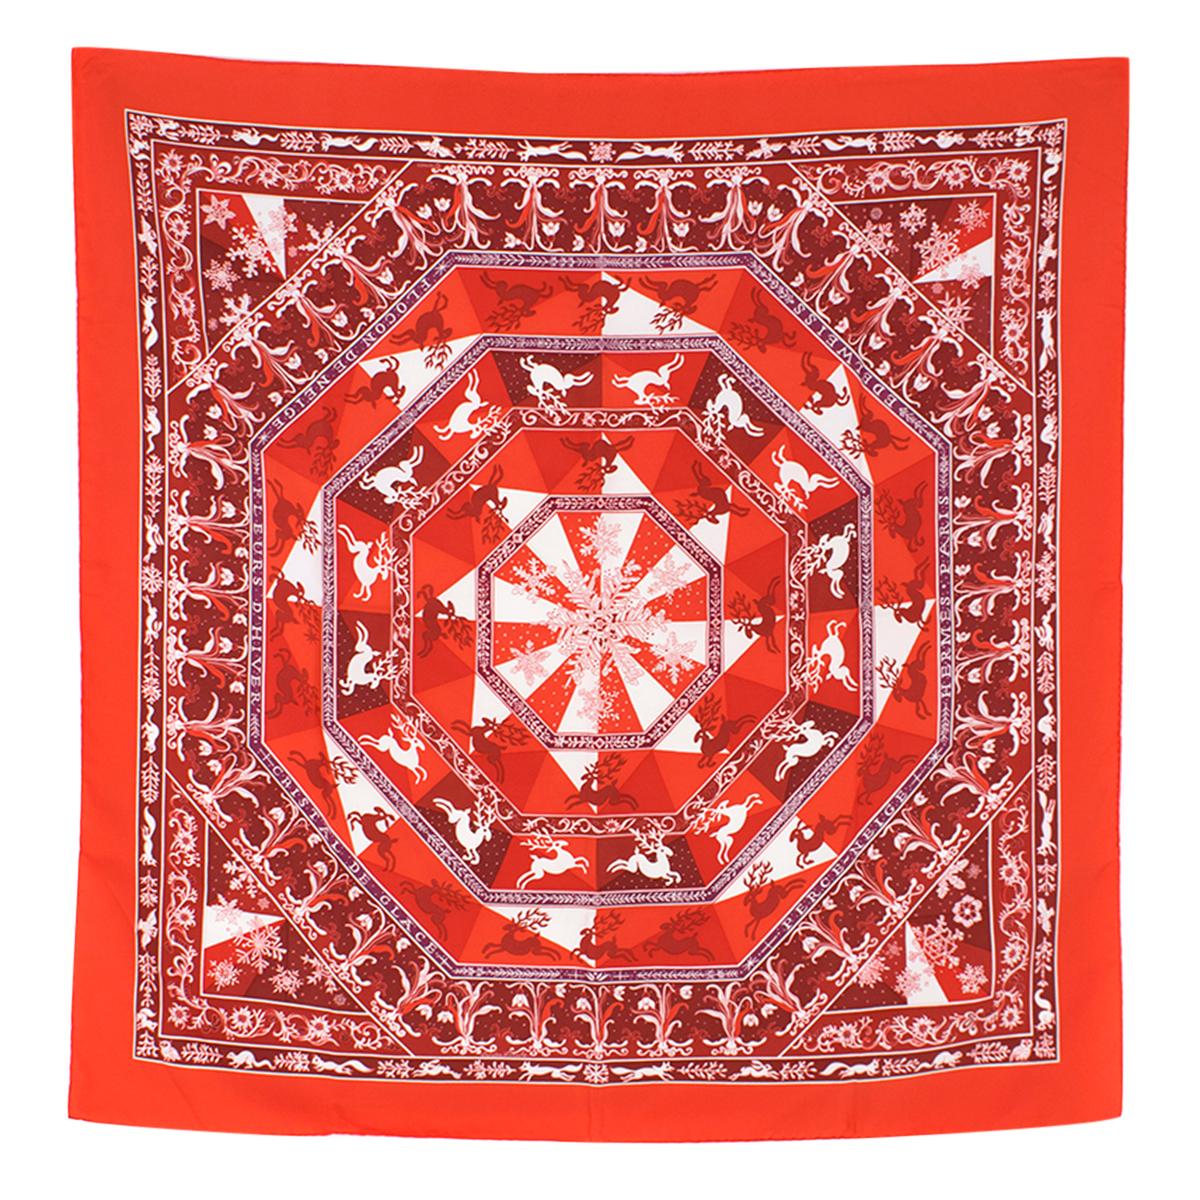 Hermes Red 'Edelweiss' Silk Scarf

- Red Scarf 
- 100% Silk 
- Winter themed print 
- Lightweight
- Rolled edges 

This item comes in an original box. 

Please note, these items are pre-owned and may show some signs of storage, even when unworn and